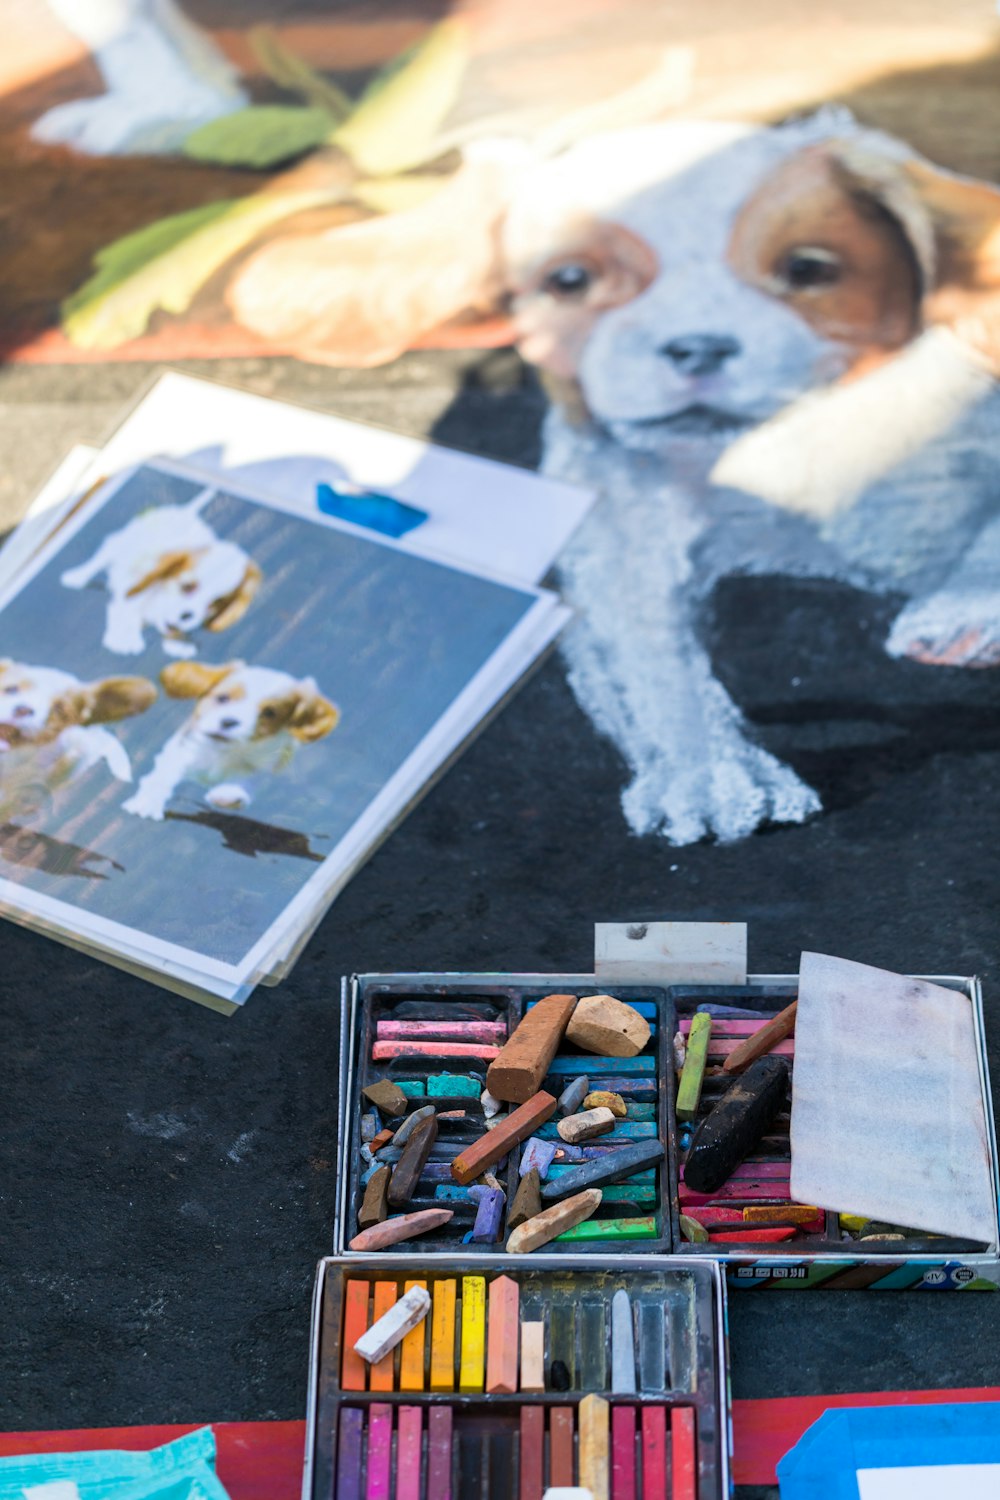 drawing of puppies beside coloring materials